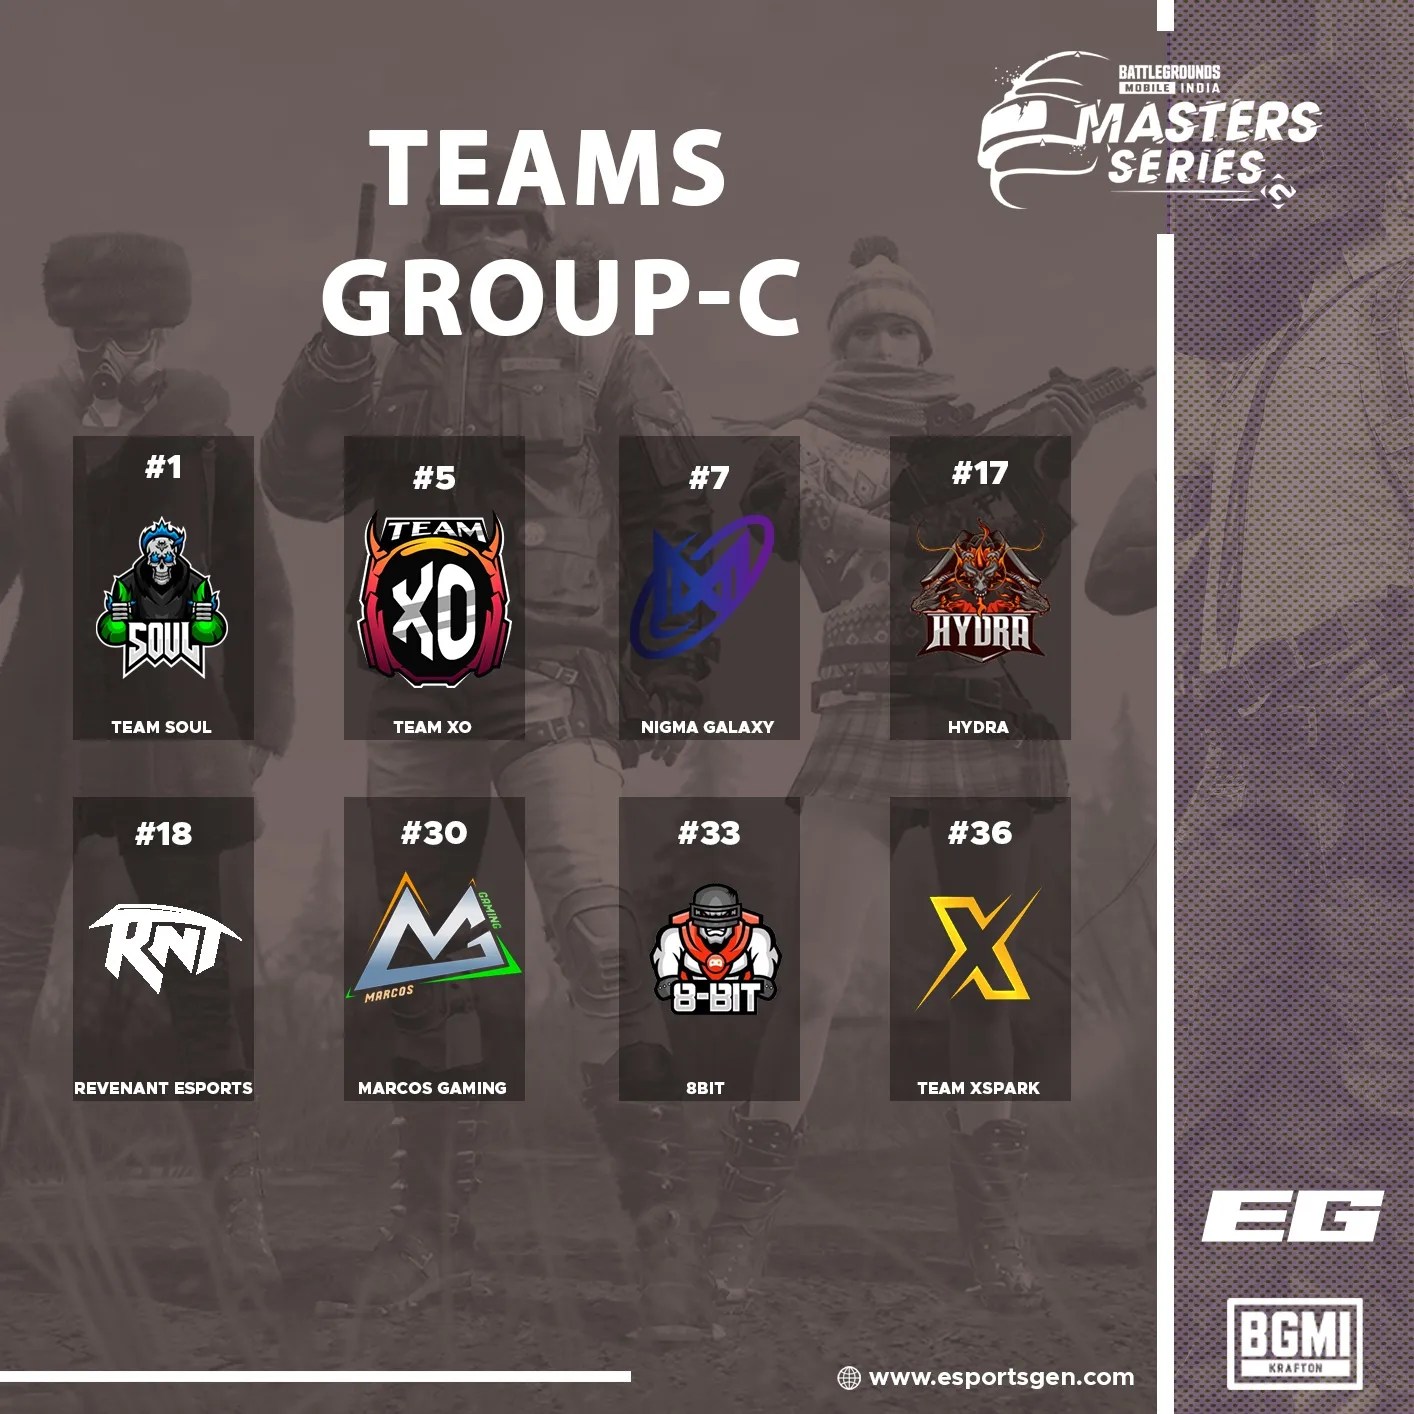 BGMI Masters Series Lan Event: Check out the group draw of Battlegrounds Mobile India Masters Series